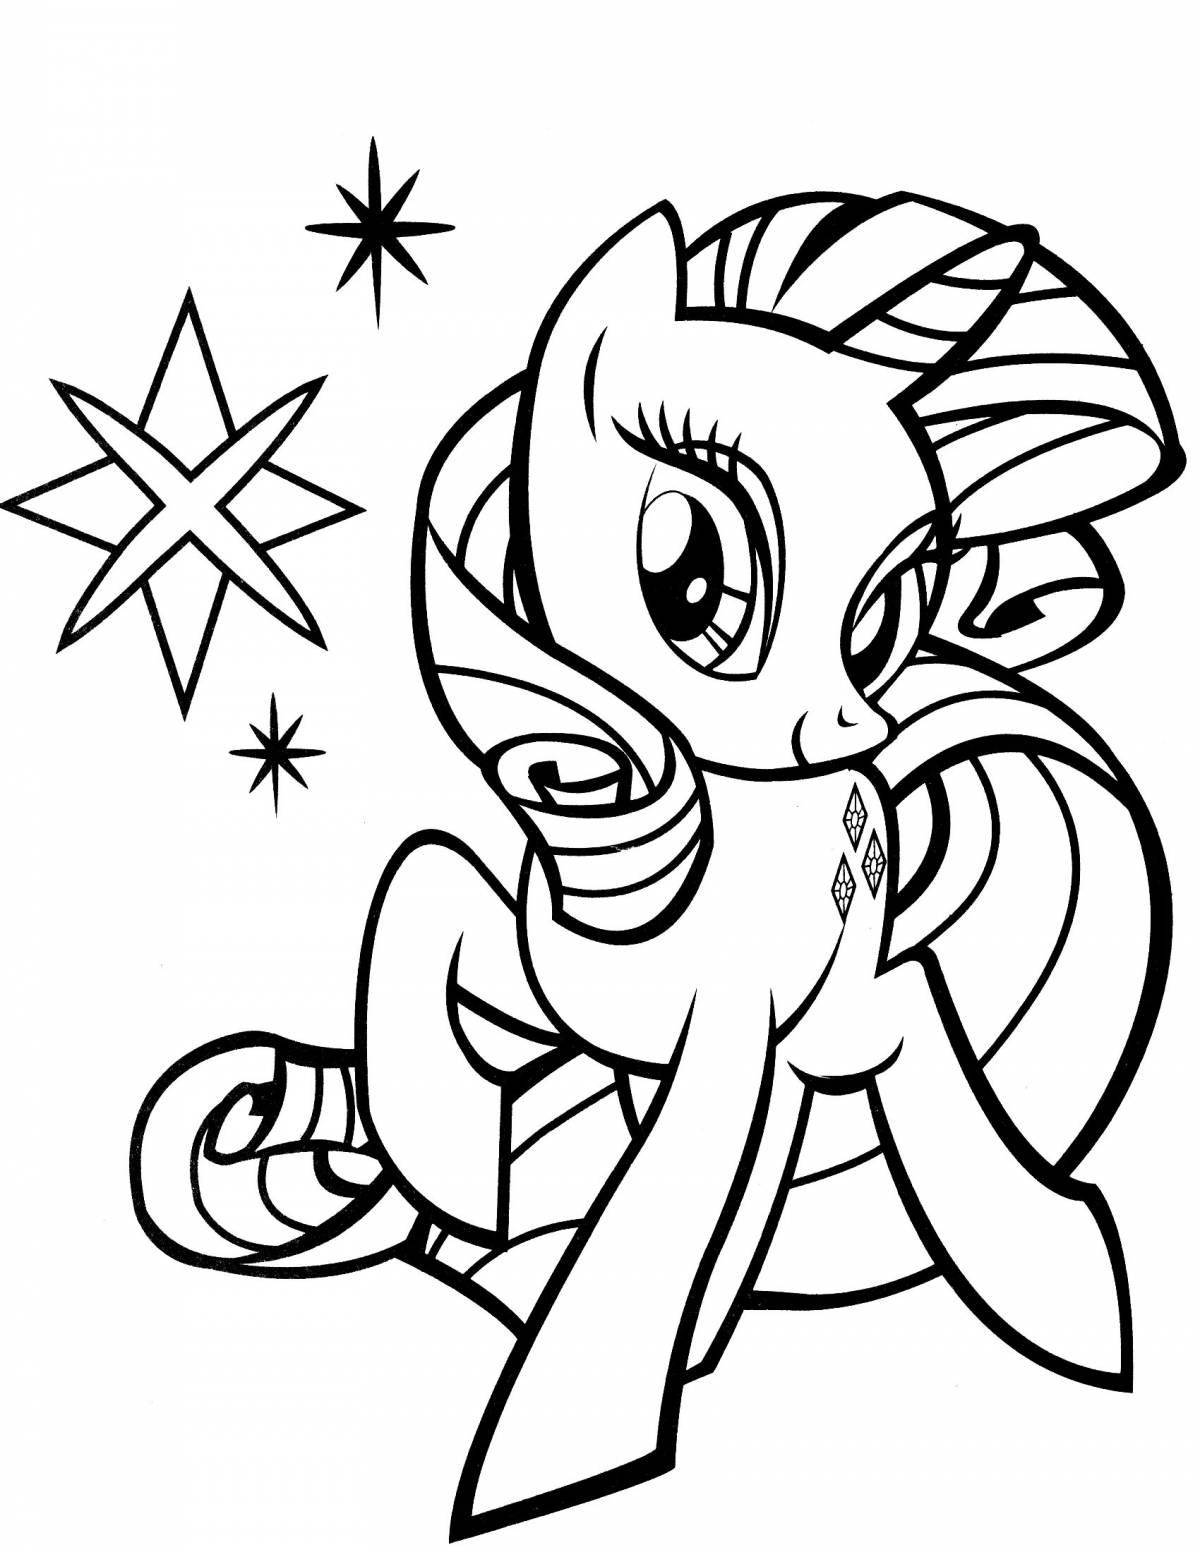 Coloring playtime my favorite pony